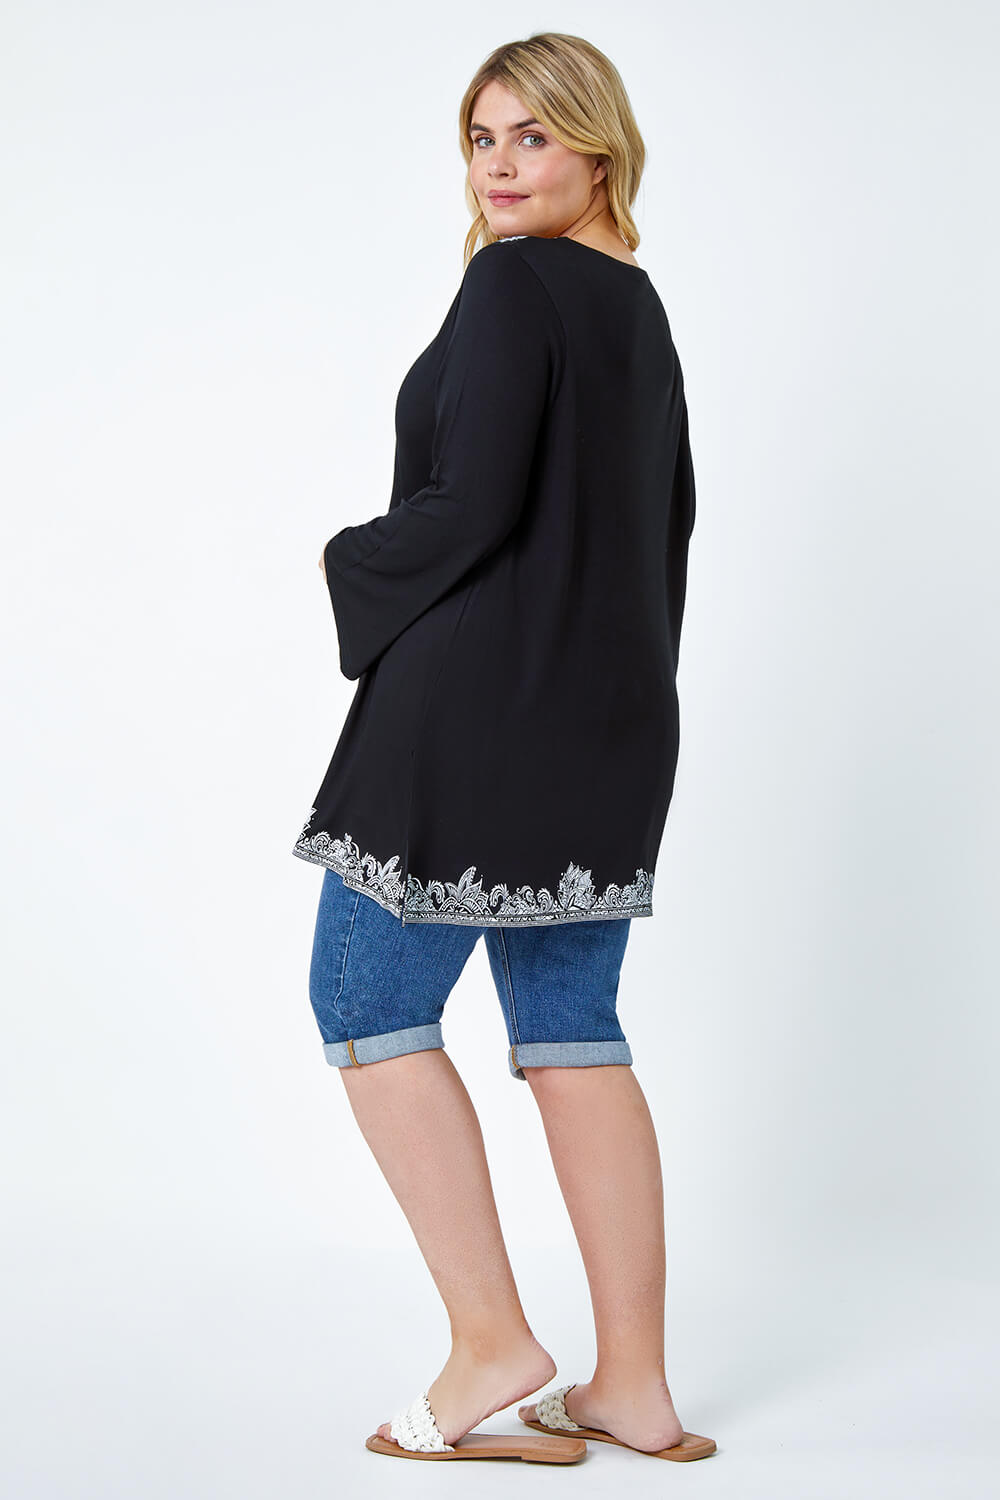 Black Curve Border Print Lace Up Top, Image 3 of 5